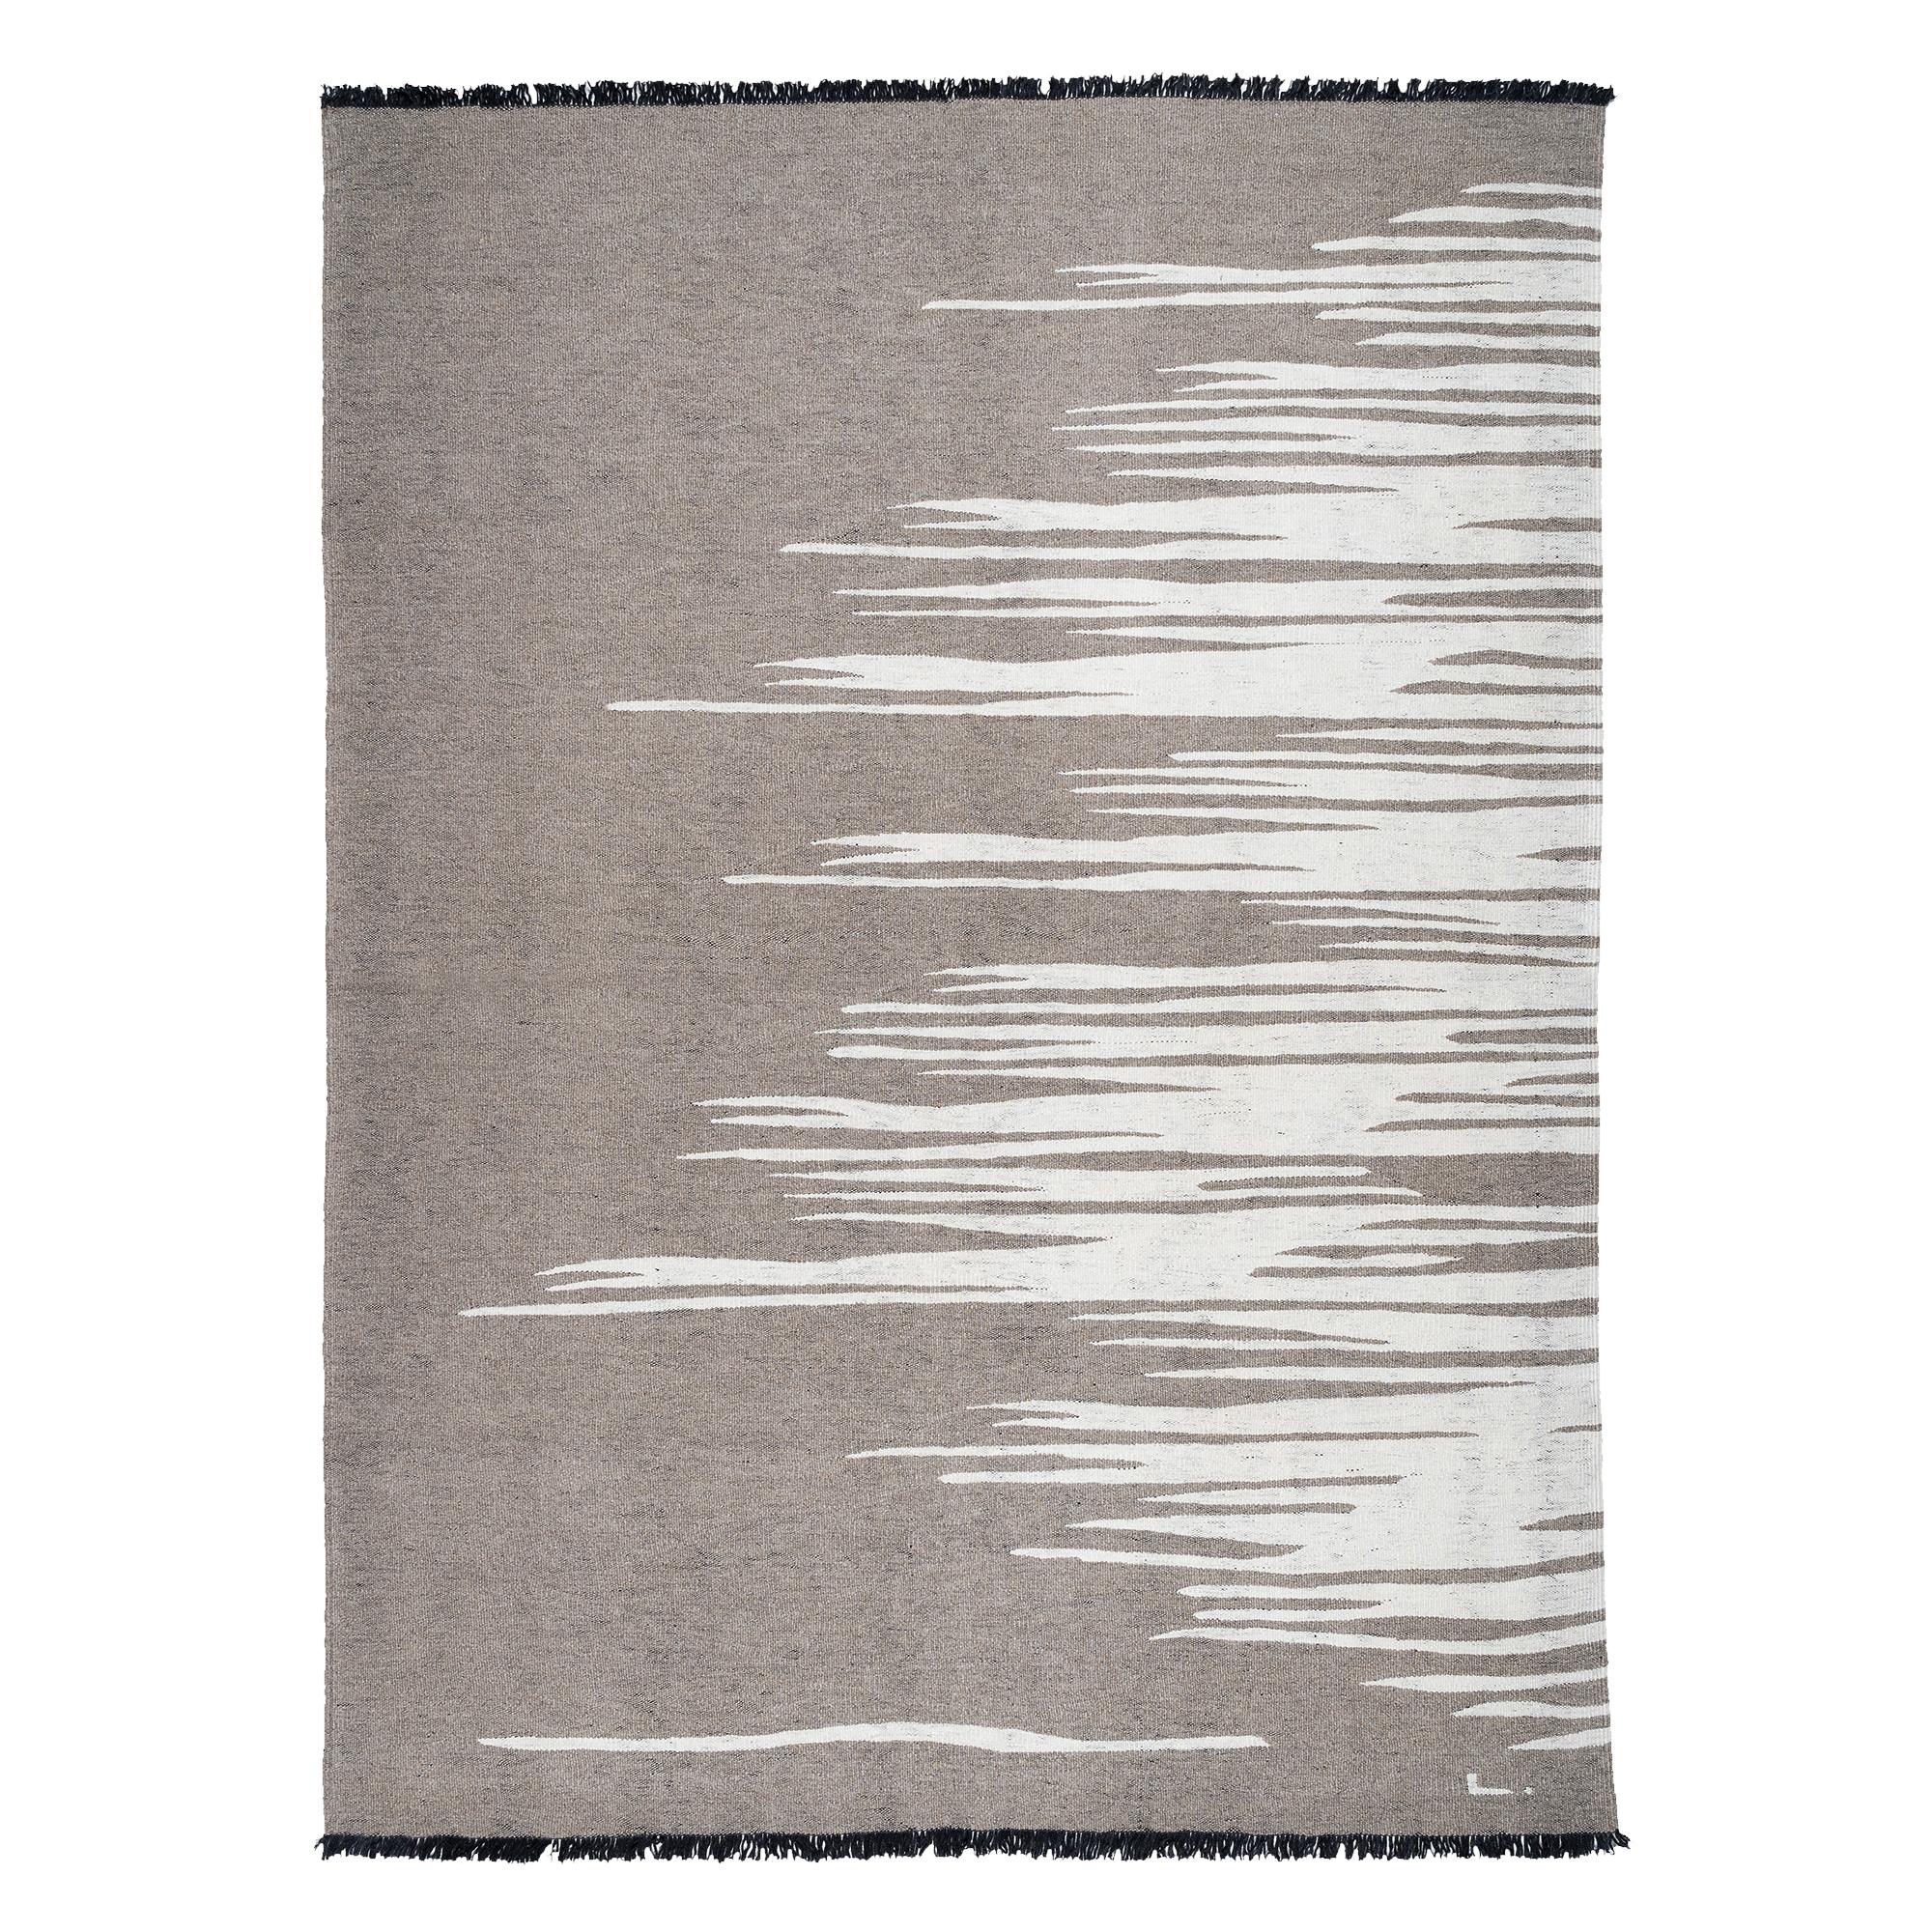 Ege No 3 Contemporary Kilim Rug Wool Handwoven Dune White and Earthy Gray For Sale 1